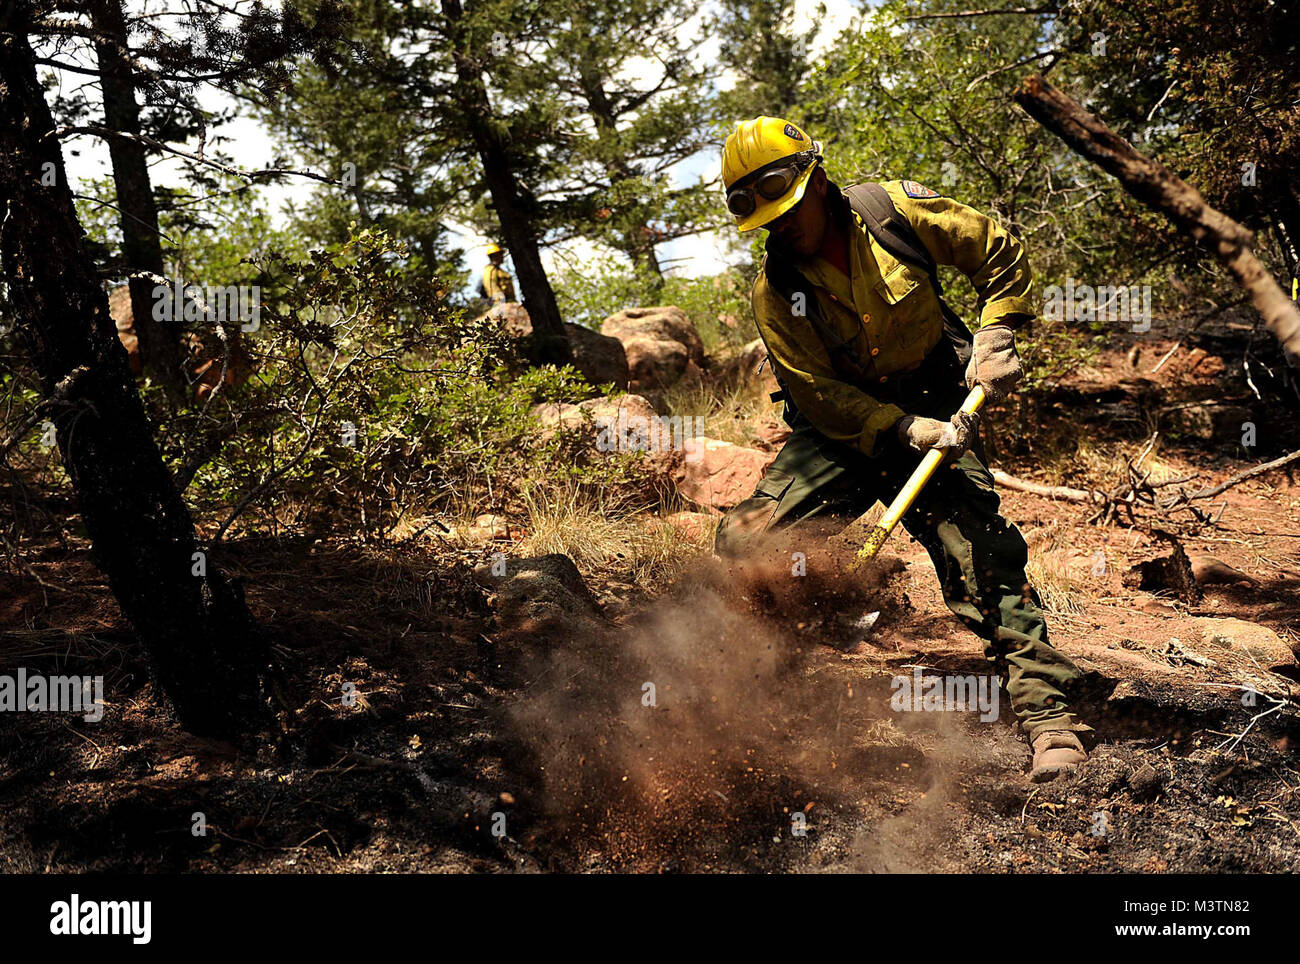 Vandenberg Air Force Base Hot Shot fire fighter Lupe Covarrubias cuts a fire line on June 28, 2012 in the Mount Saint Francois area of Colorado Springs, Co. while helping to battle several fires in Waldo Canyon.  The Waldo Canyon fire has grown to 18,500 acres and burned over 300 homes. Currently, more than 90 firefighters from the Academy, along with assets from Air Force Space Command; F.E. Warren Air Force Base, Wyo.; Fort Carson, Colo.; and the local community continue to fight the Waldo Canyon fire.(U.S. Air Force Photo by: Master Sgt. Jeremy Lock) (Released) 120628-F-JQ435-033 by AirmanM Stock Photo